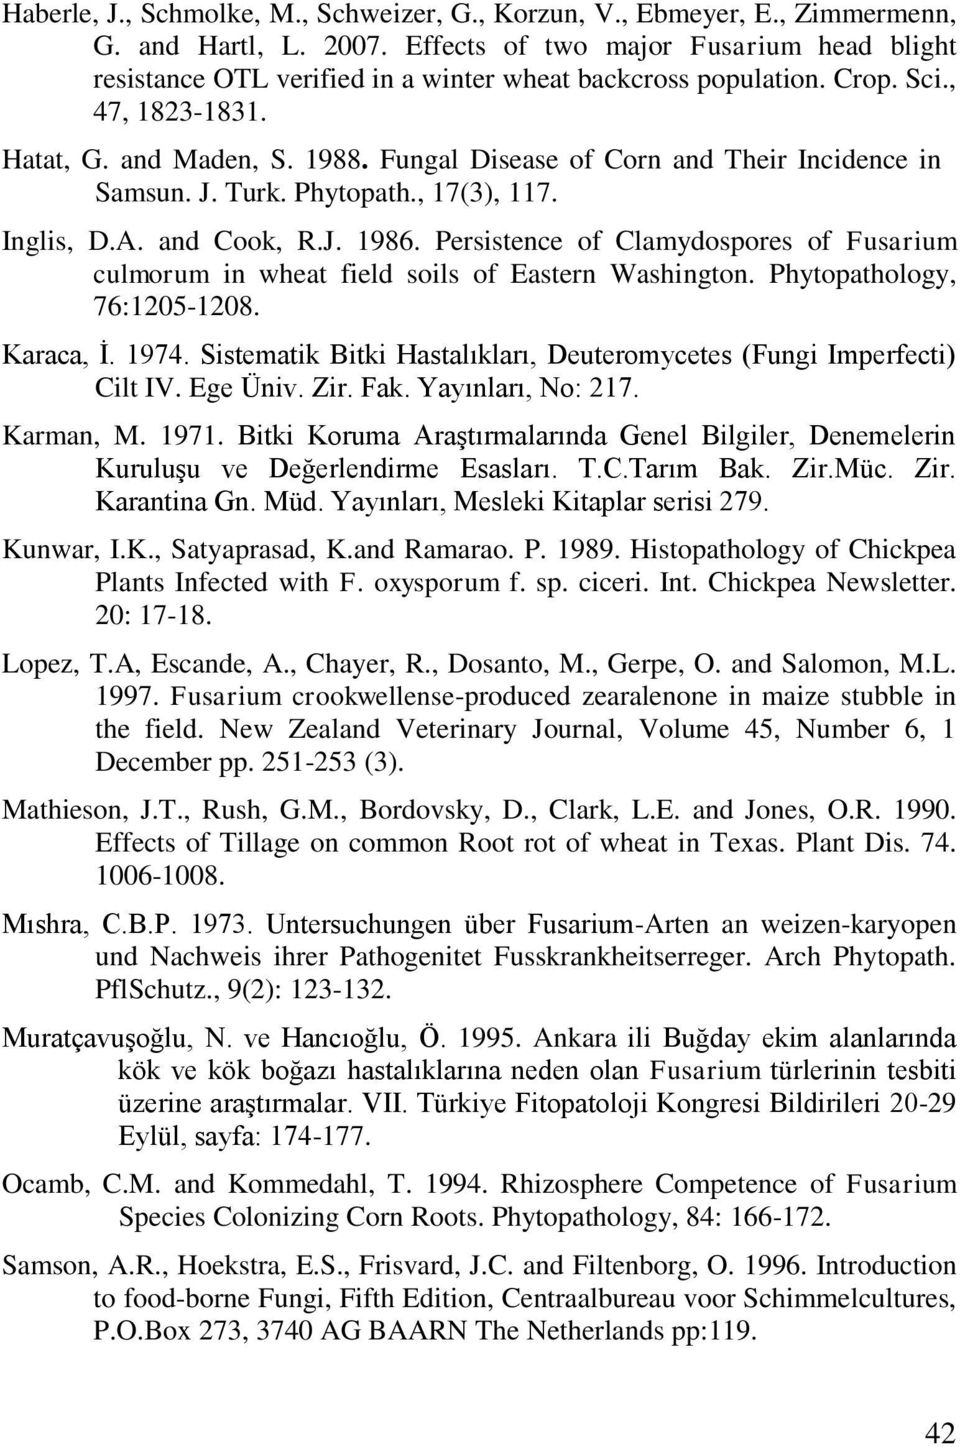 Fungal Disease of Corn and Their Incidence in Samsun. J. Turk. Phytopath., 17(3), 117. Inglis, D.A. and Cook, R.J. 1986.